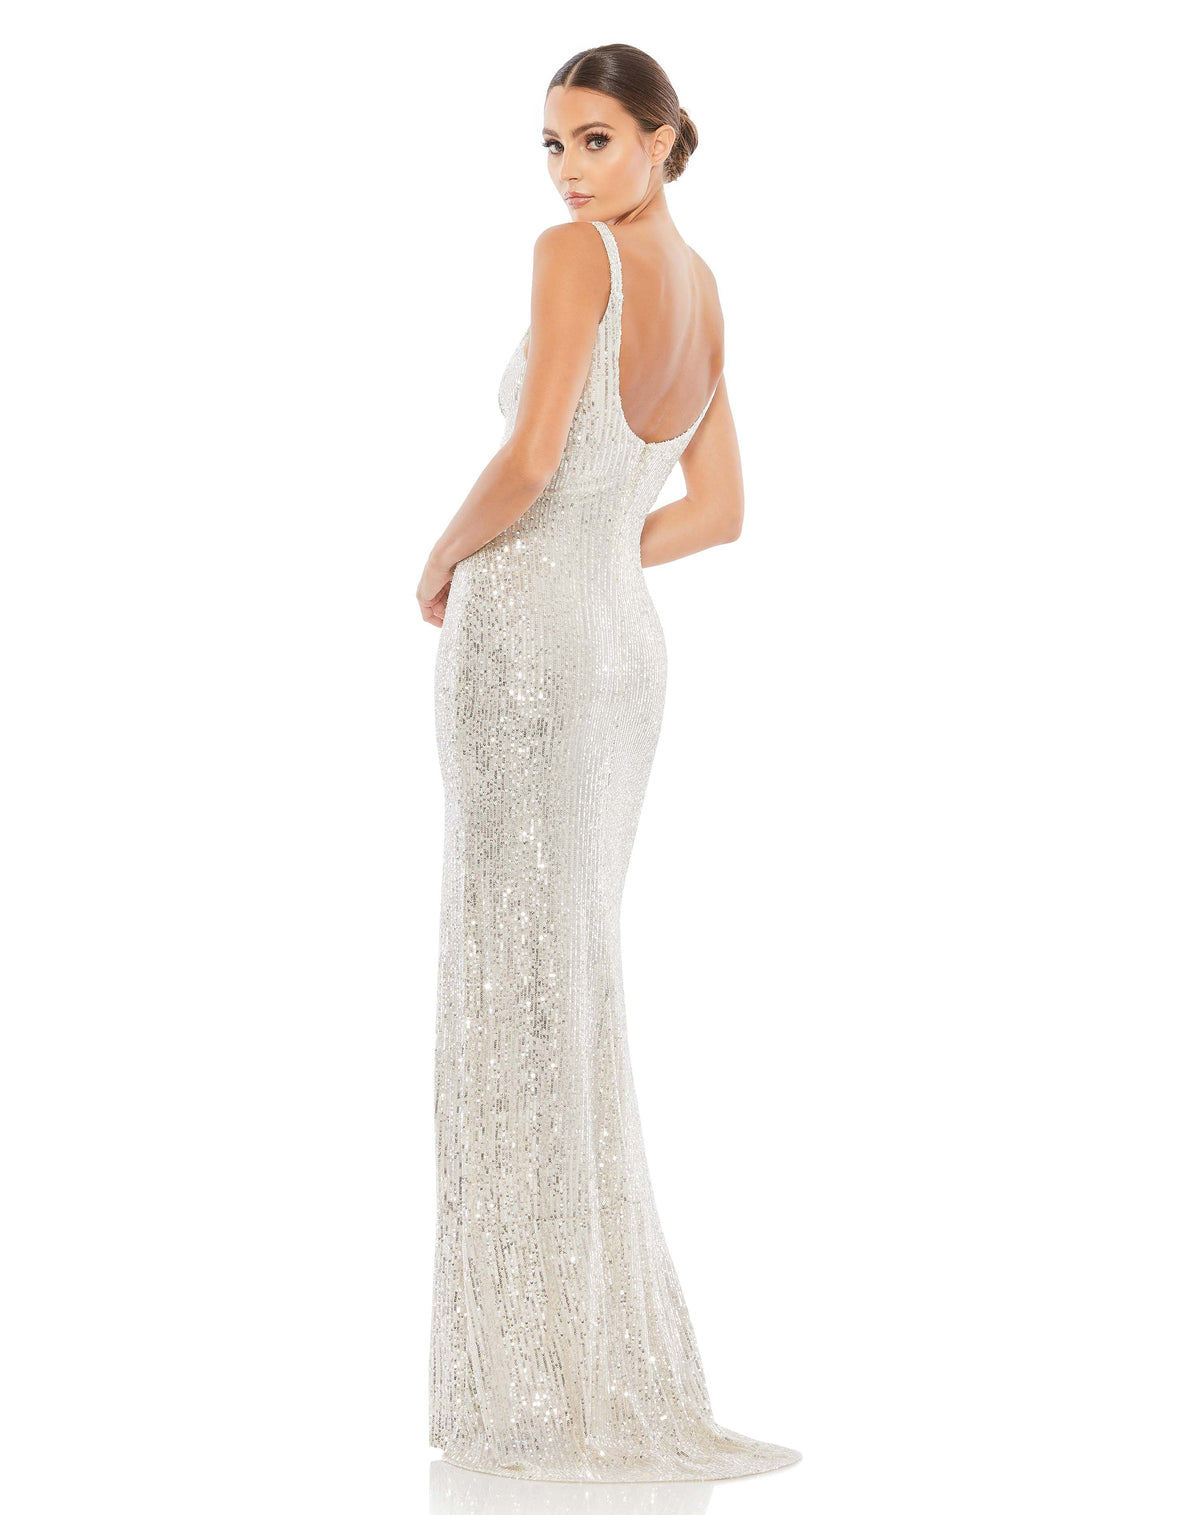  This elegant Mac Duggal, long, silver All over-sequined sleeveless gown with a plunging sweetheart neckline, a low scoop back, and a floor-length skirt featuring a high front slit and delicate sweeping train. This elegant evening dress is the perfect dress perfect for proms, black-tie affairs, weddings and special events! back